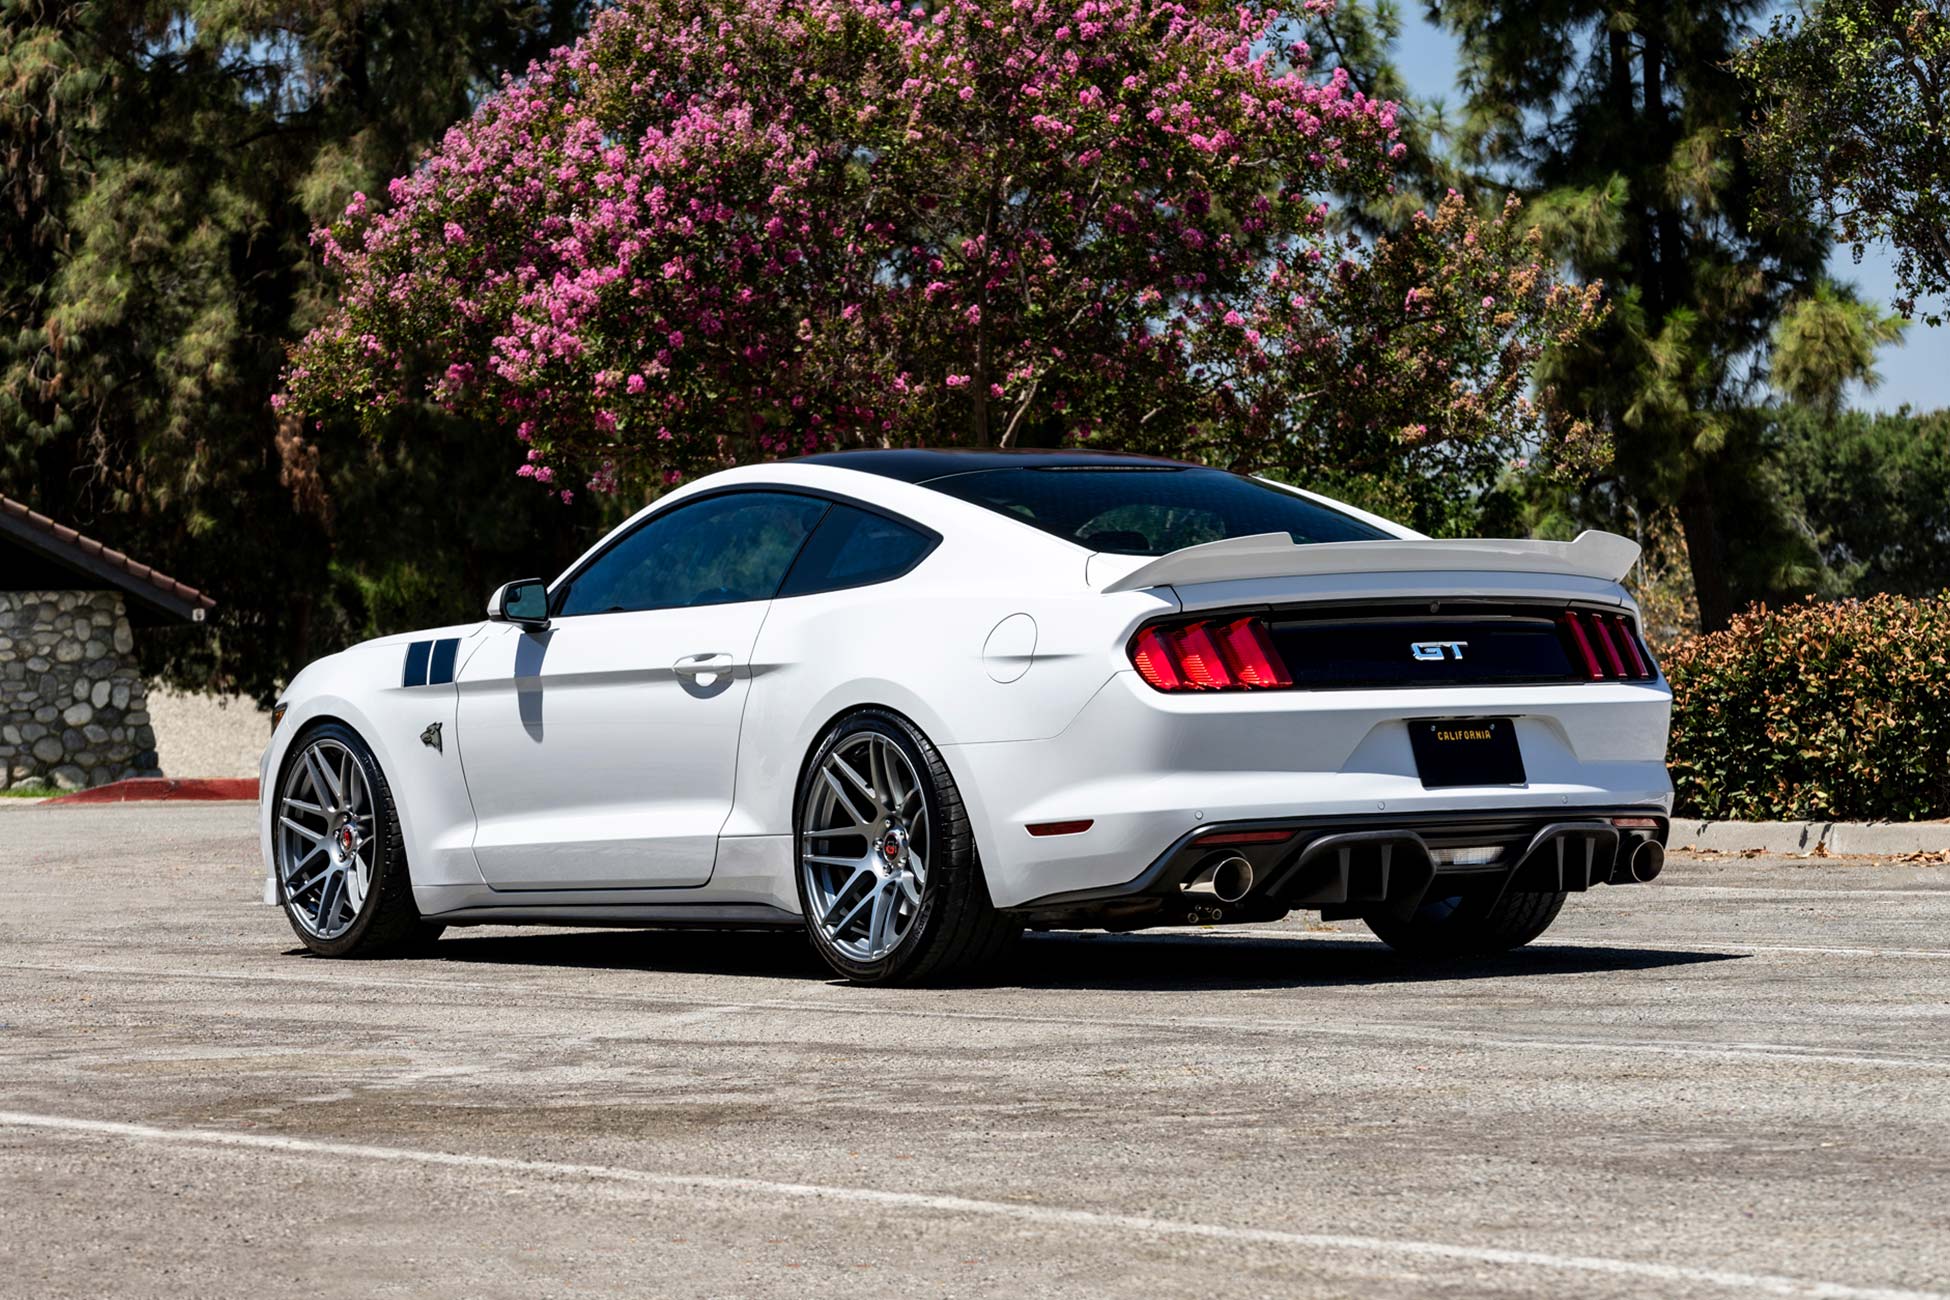 Ford Mustang GT With A Staggered 20x9.5 Front and a 20x10.5 Rear Fitment